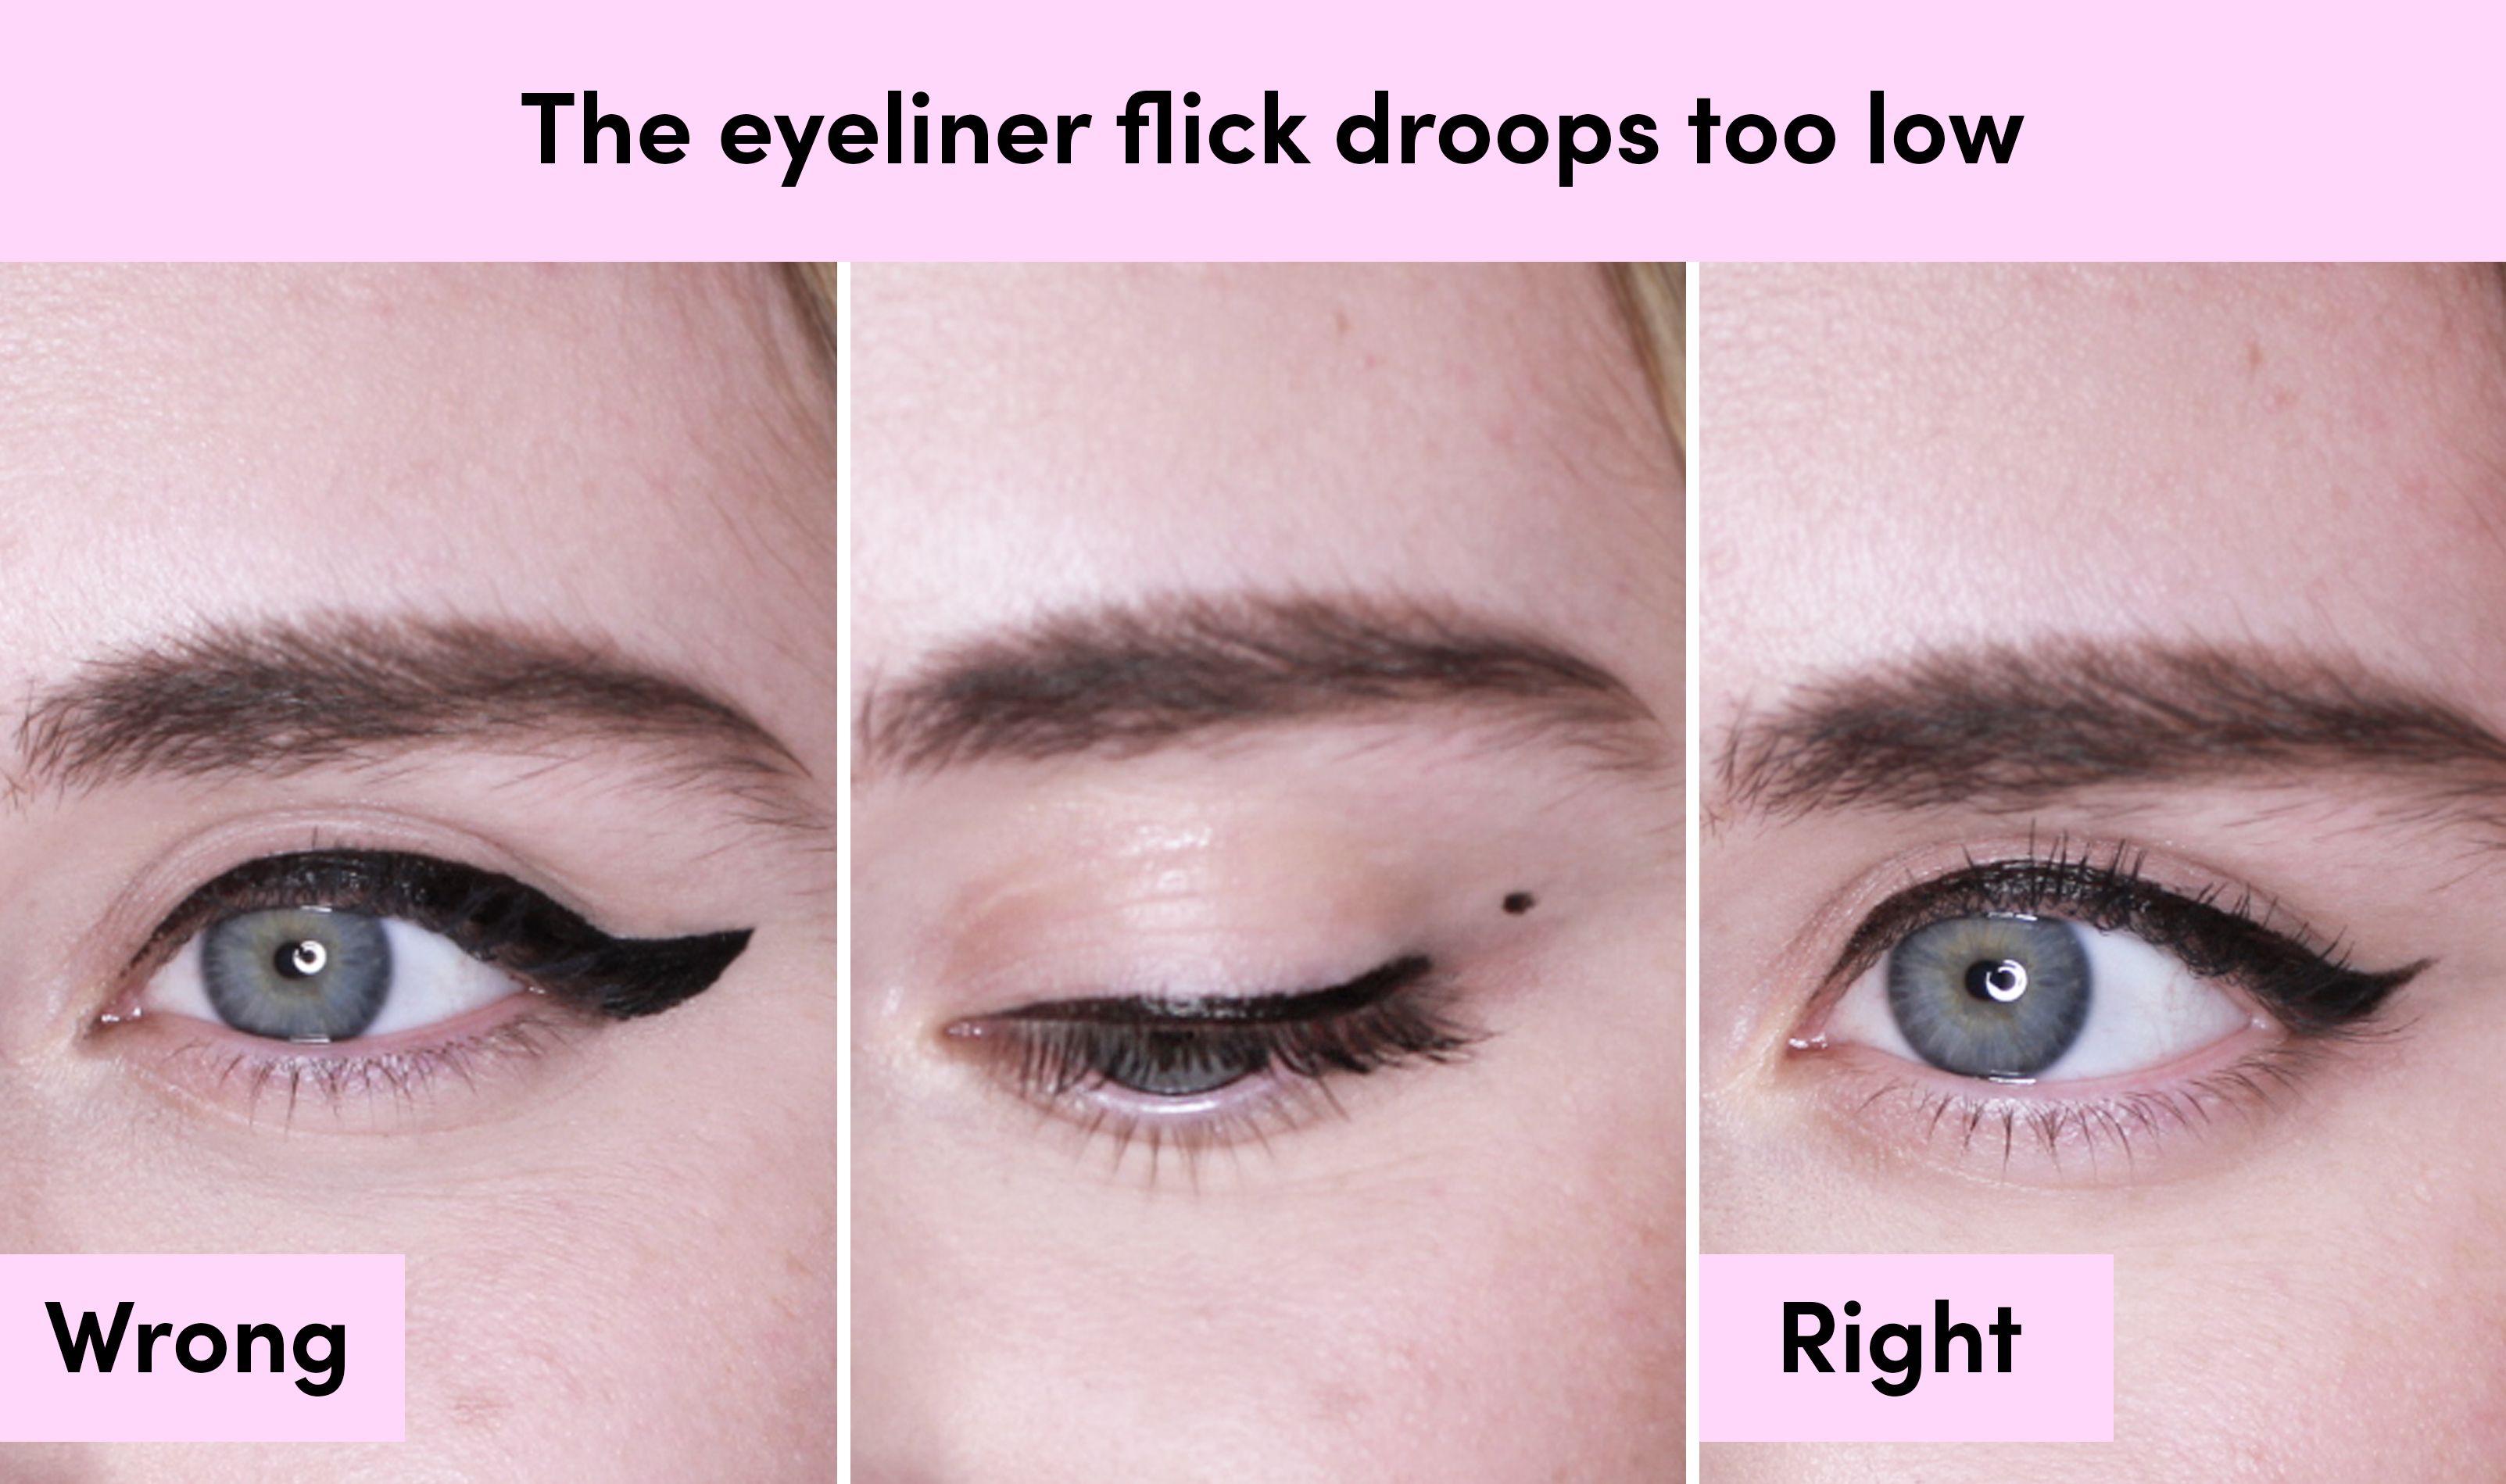 How to apply liquid eyeliner - 7 to avoid making